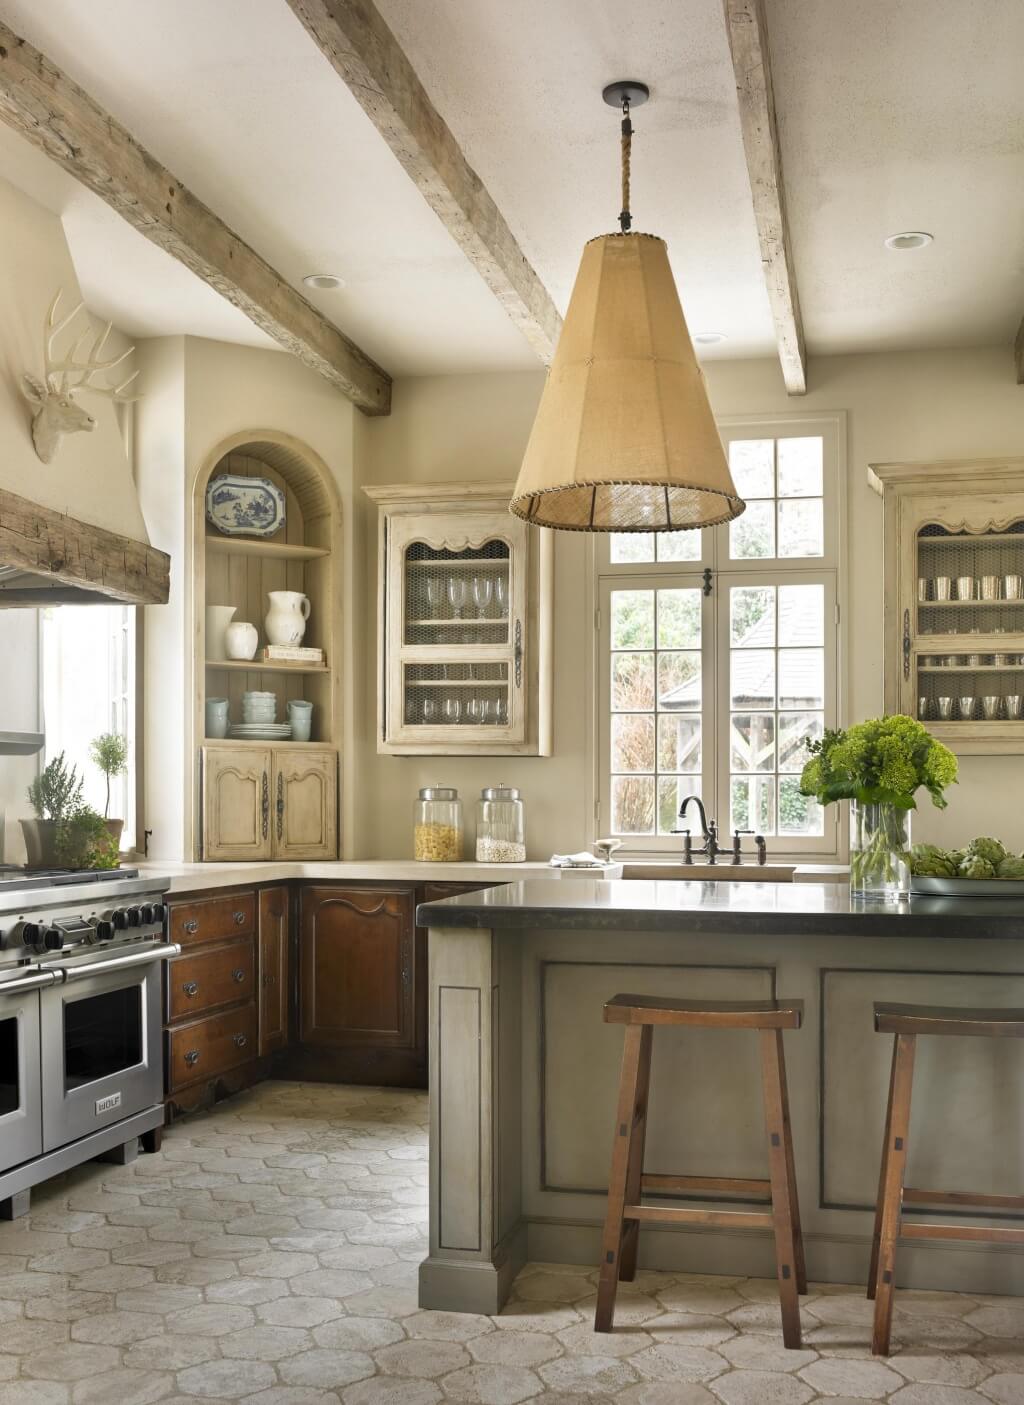 Simple French country kitchen lighting